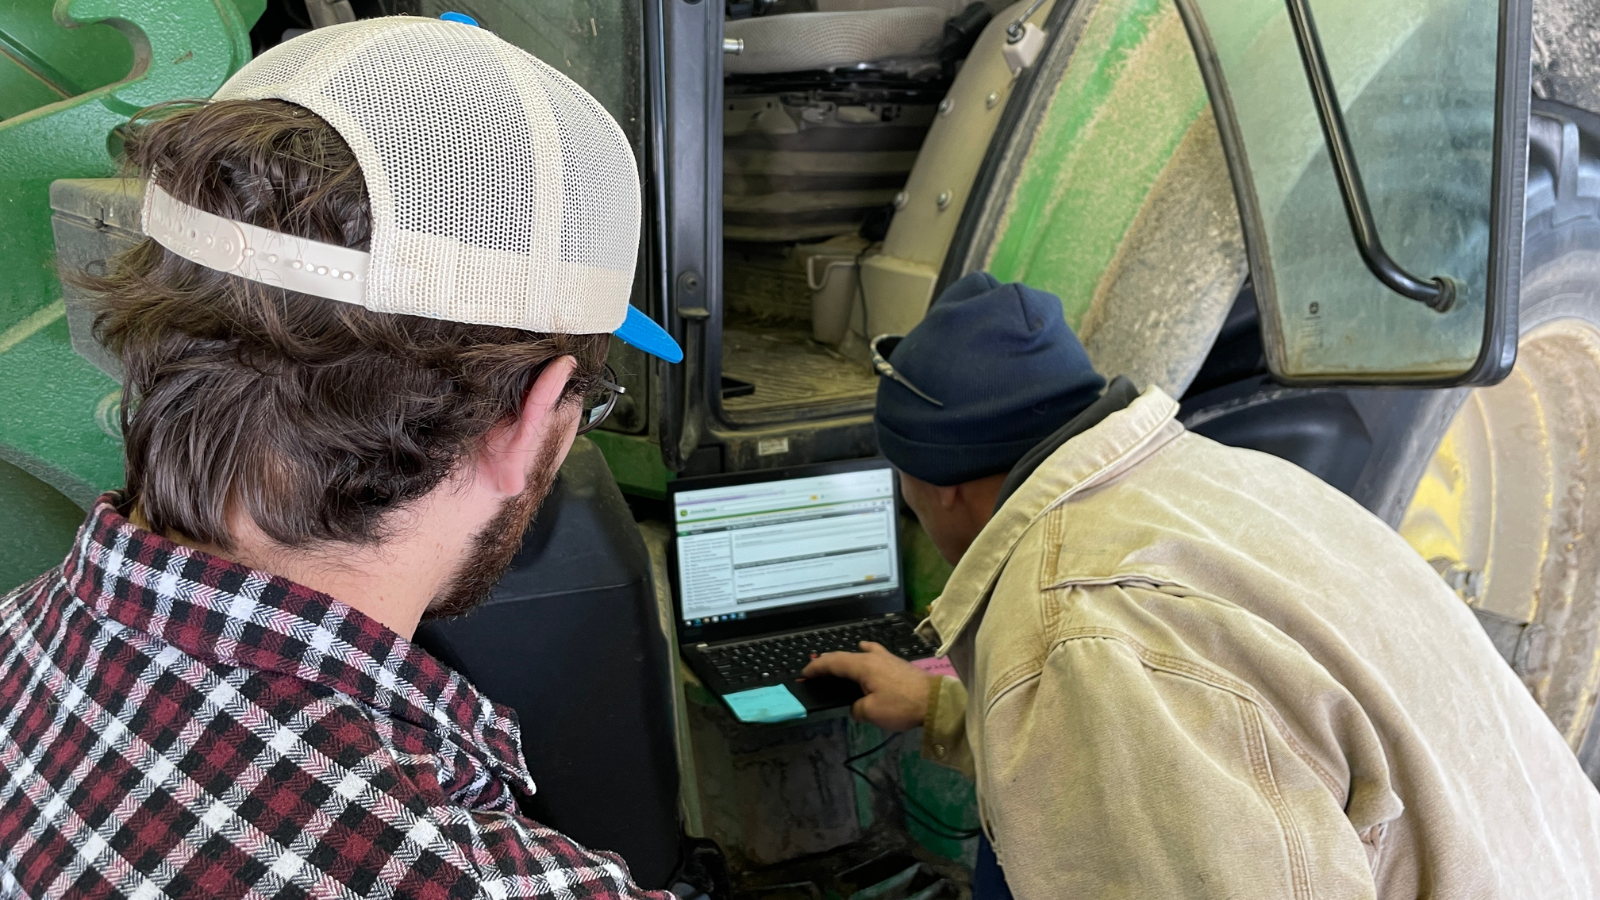 Right to Repair Campaign Director Kevin O'Reilly and a mechanic look at Deere's software repair tools on a laptop connected to a green tractor